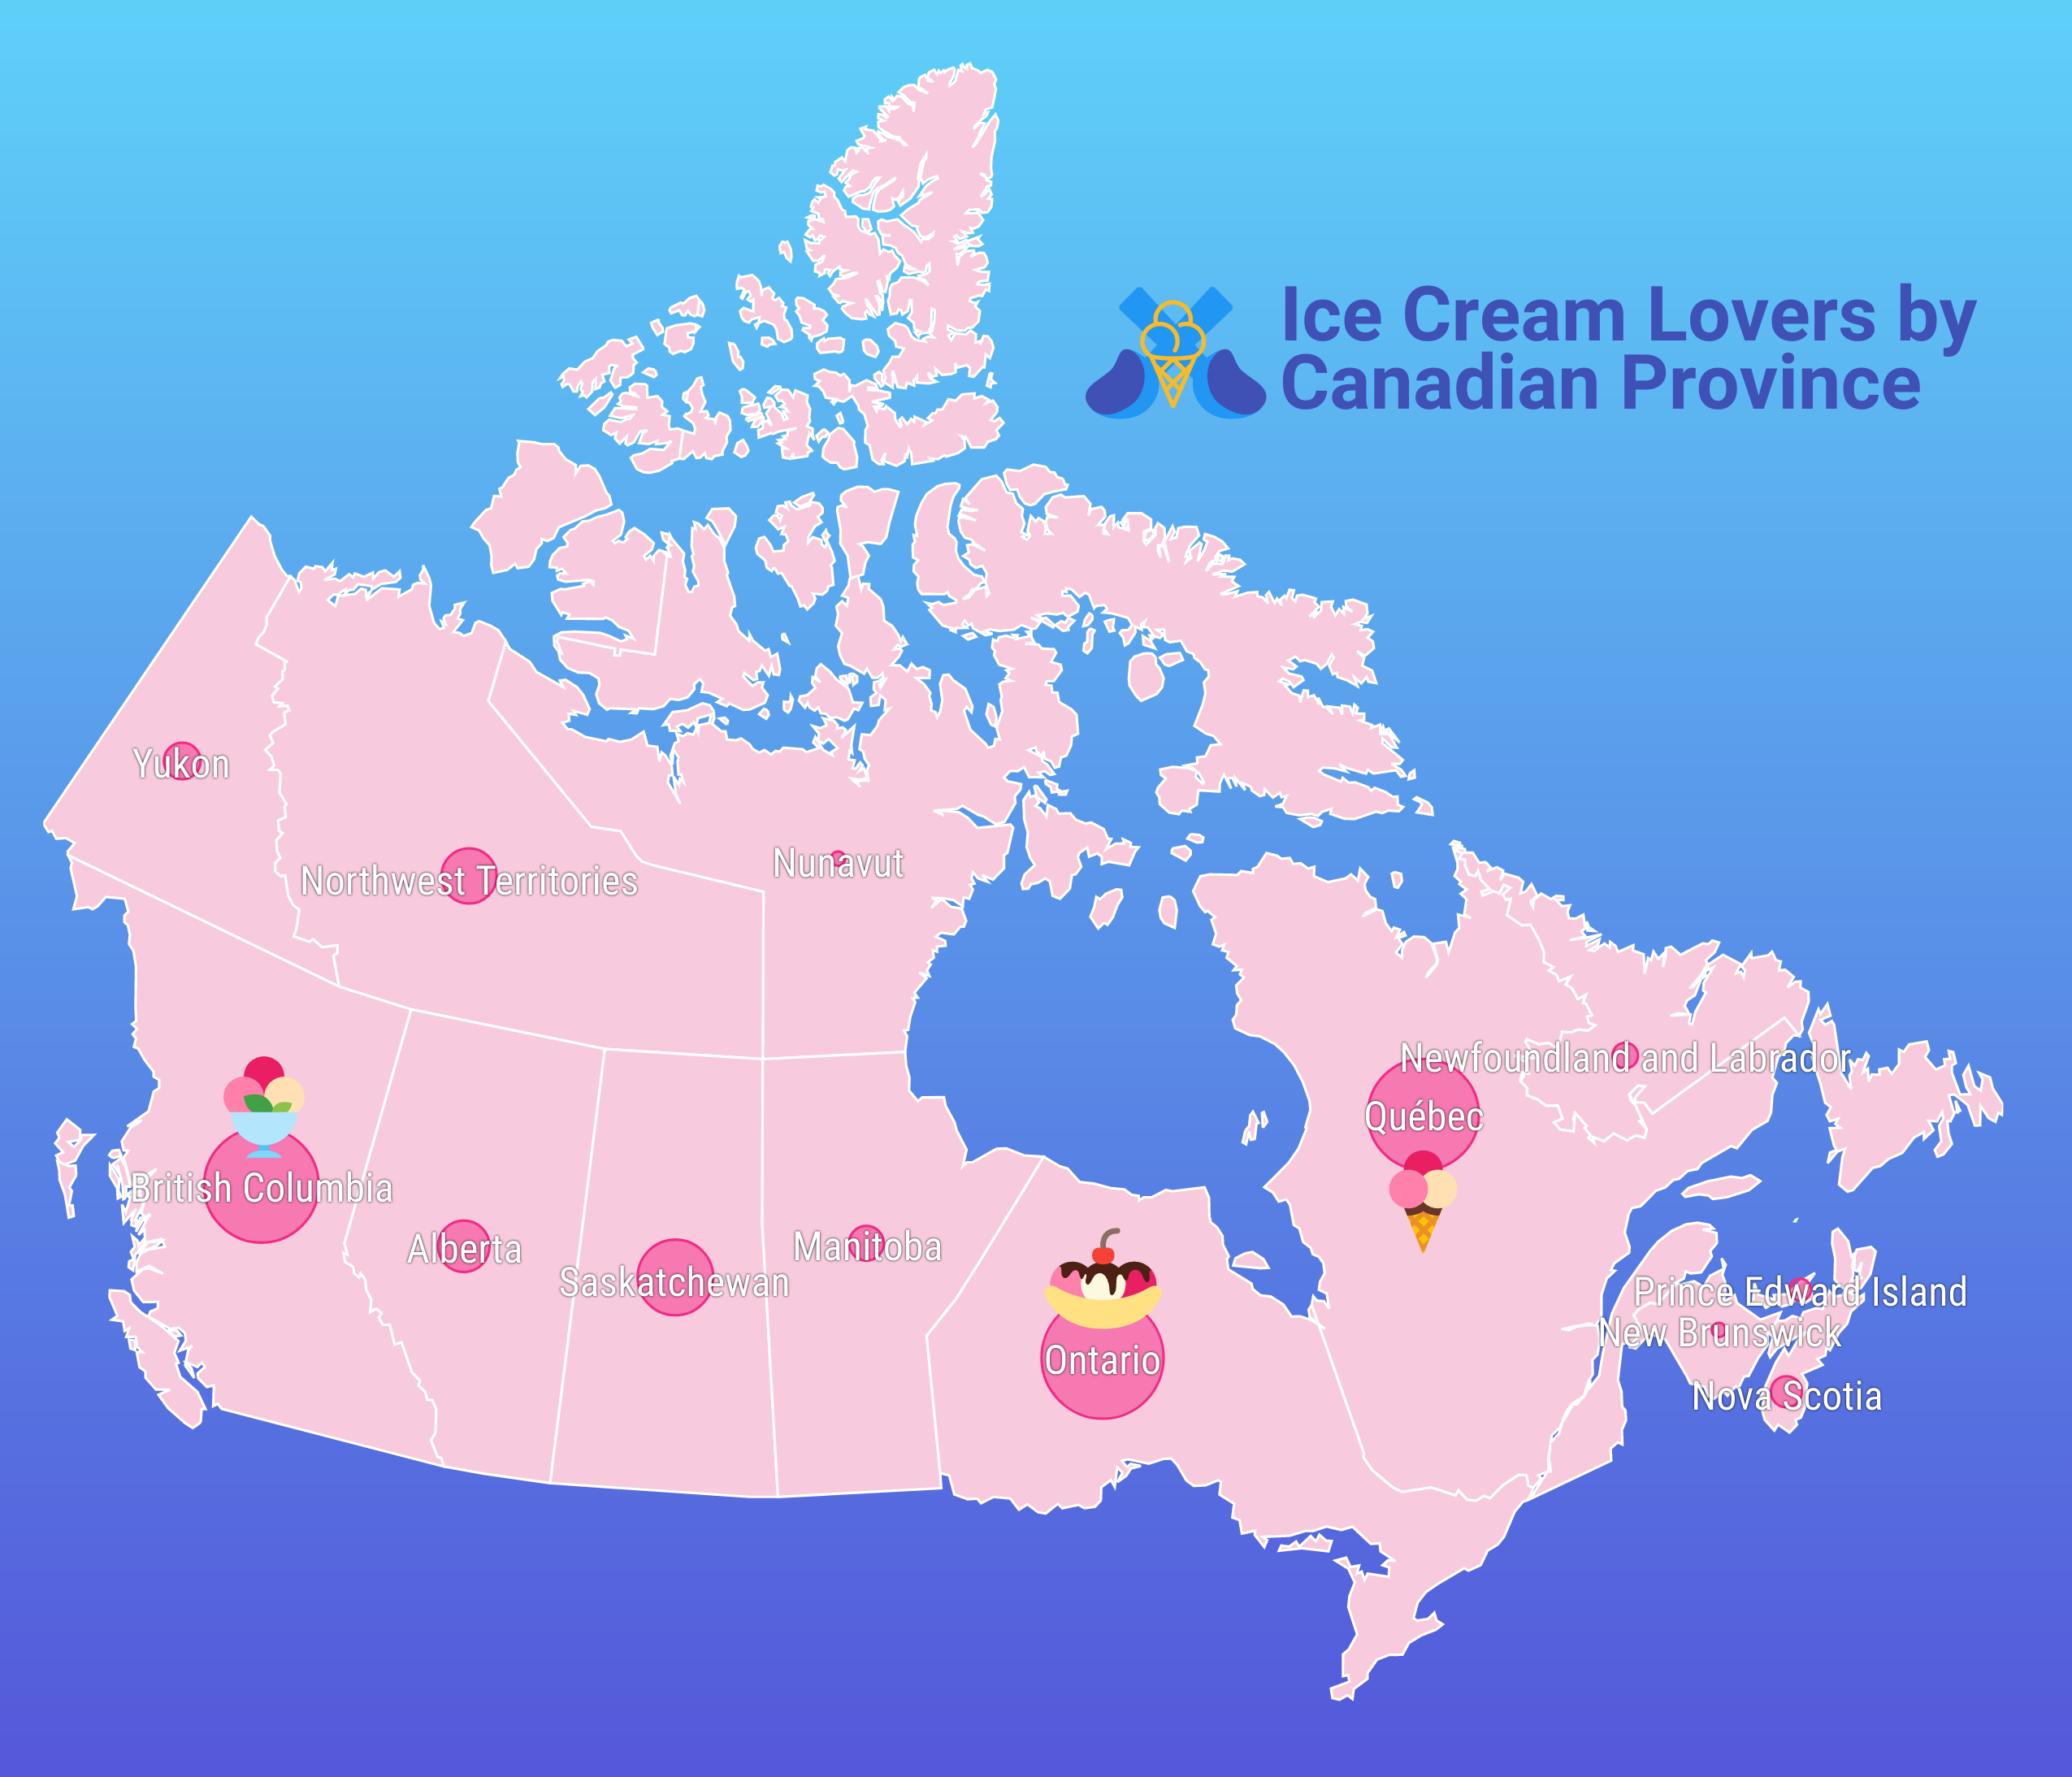 A bubble map version of the 'Ice Cream Lovers by Canadian Province' represented in the choropleth map above. The names of the provinces appear over each one in white text outlined in black, and the provinces themselves are all the same shade of light pink. Each province has a dark pink circle on it of various sizes, representing the amount of ice cream lovers in each province. The provinces with the largest circles have icons of ice cream sundaes and cones over them. The background is a light to dark blue gradient.